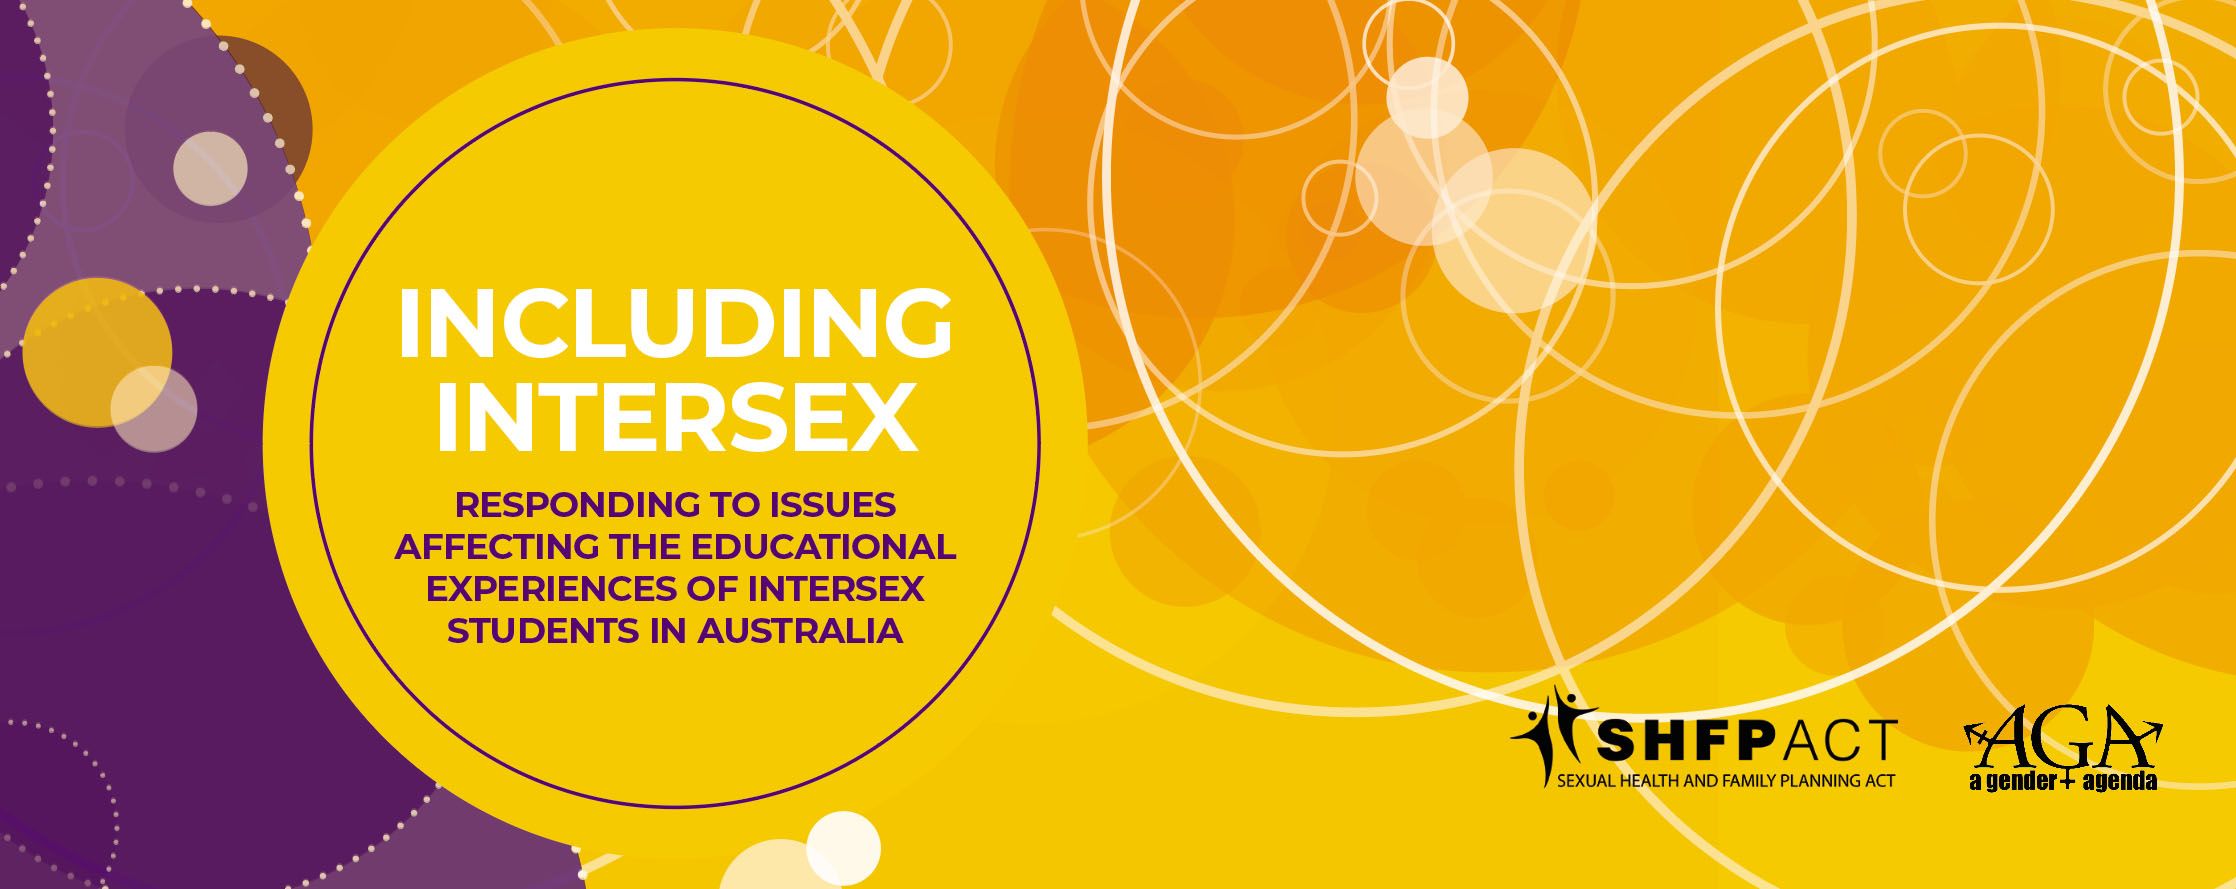 Including Intersex: responding to issues affecting the educational experiences of intersex students in Australia 